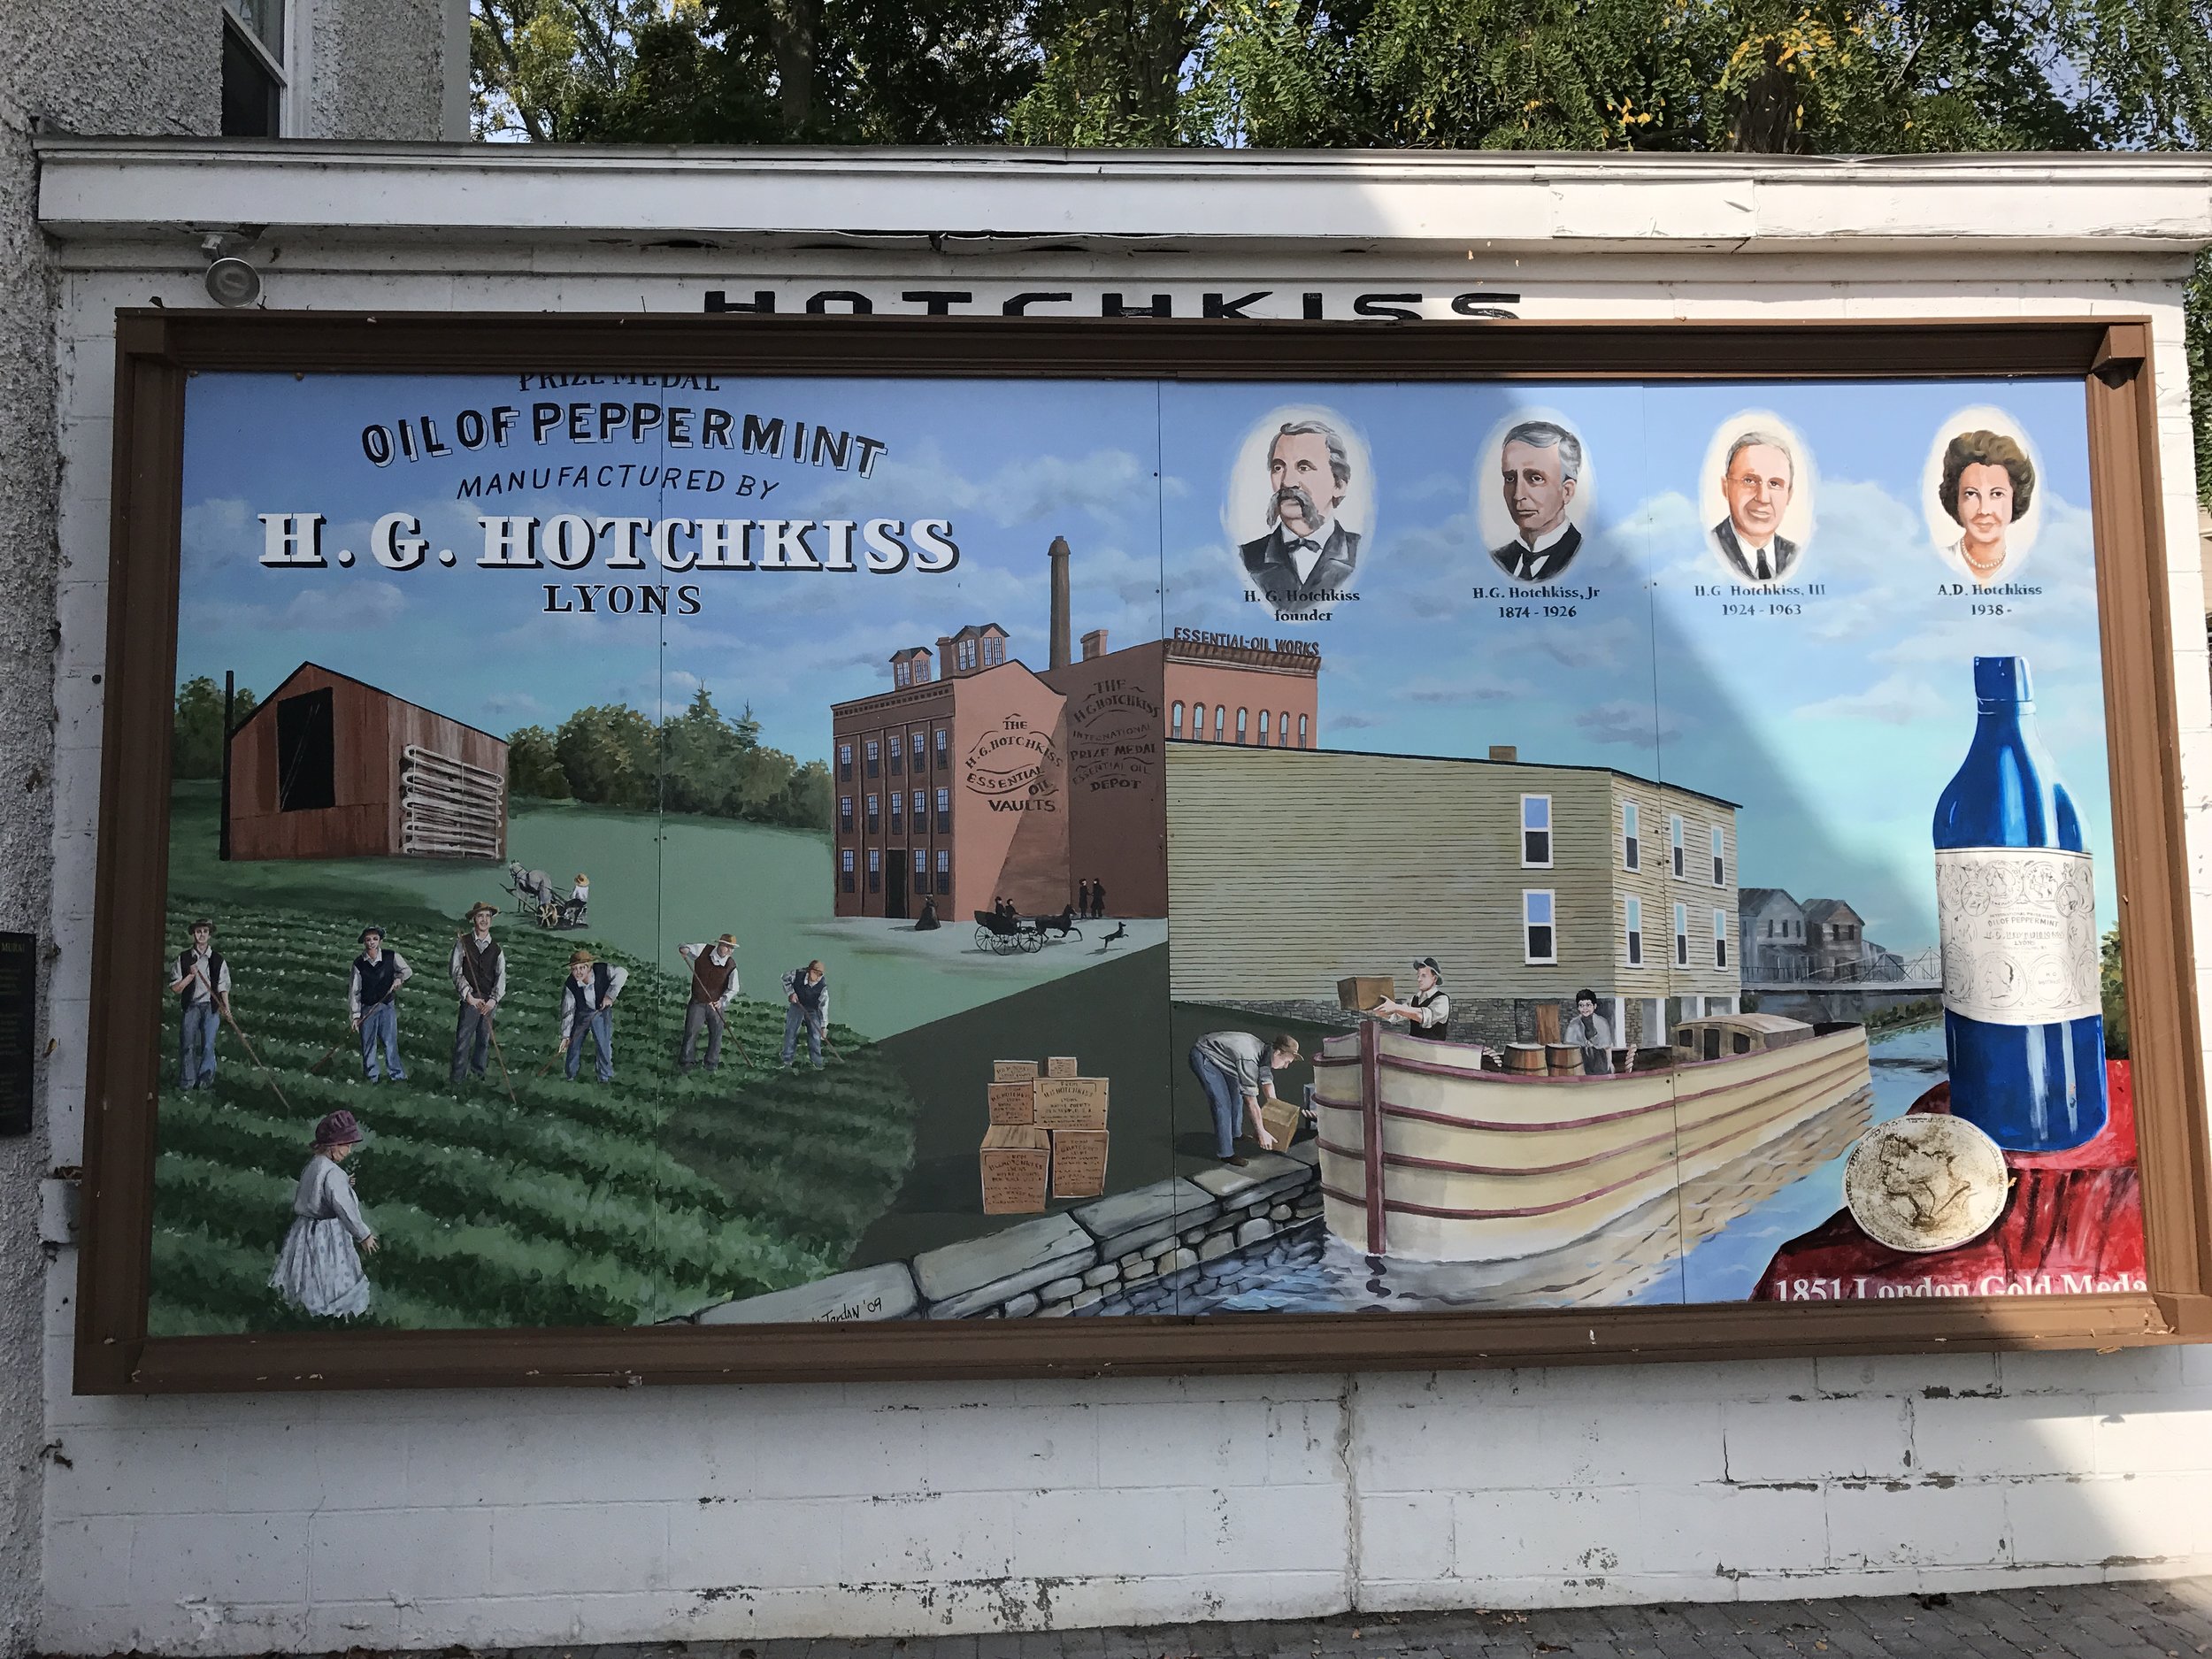 Peppermint Mural, in the location of an old peppermint processing operation